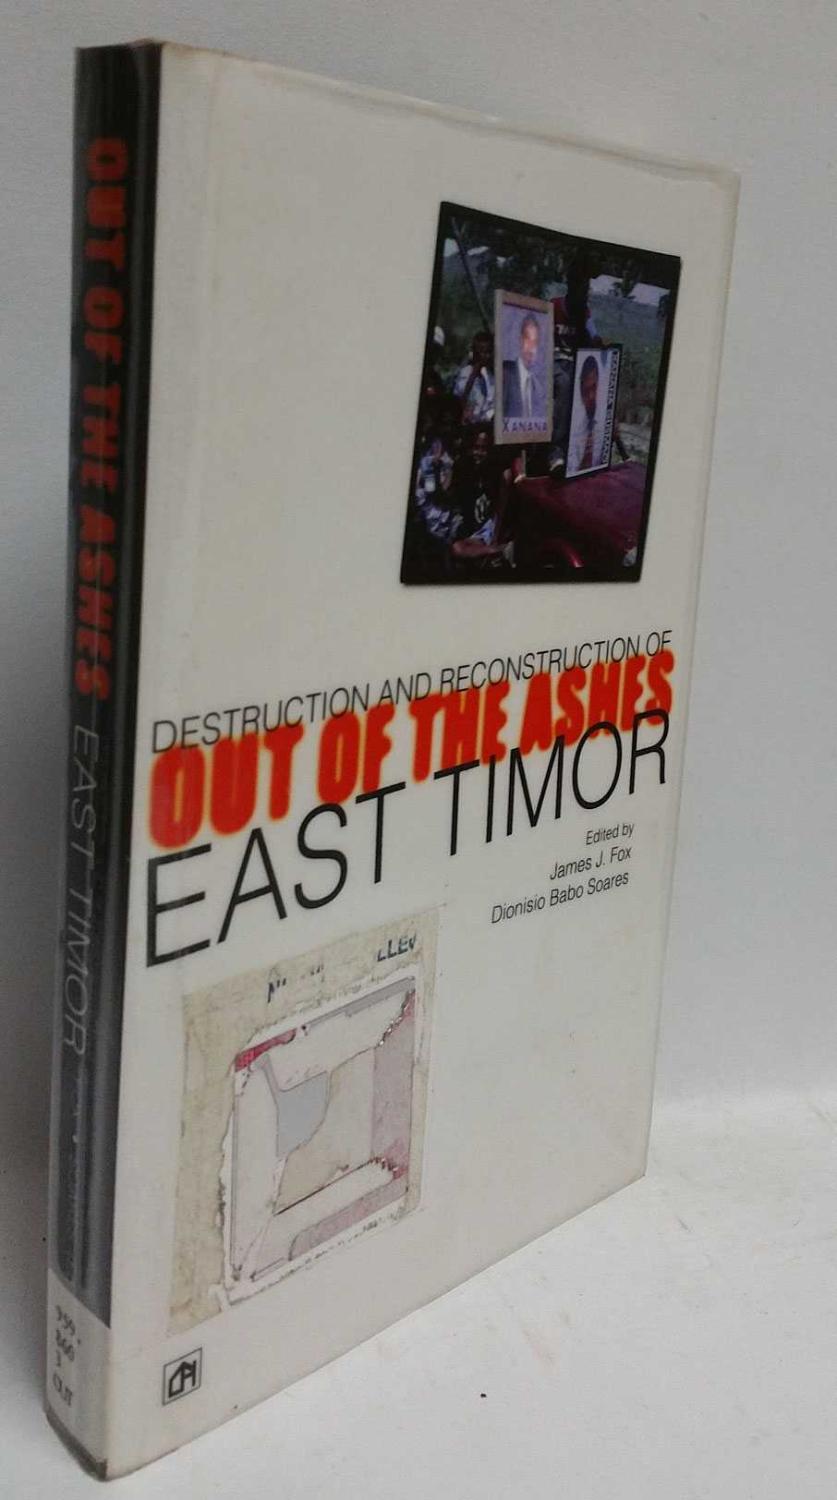 Out of the Ashes: Destruction and Reconstruction of East Timor - James J. Fox; Bionisio Babo Soares